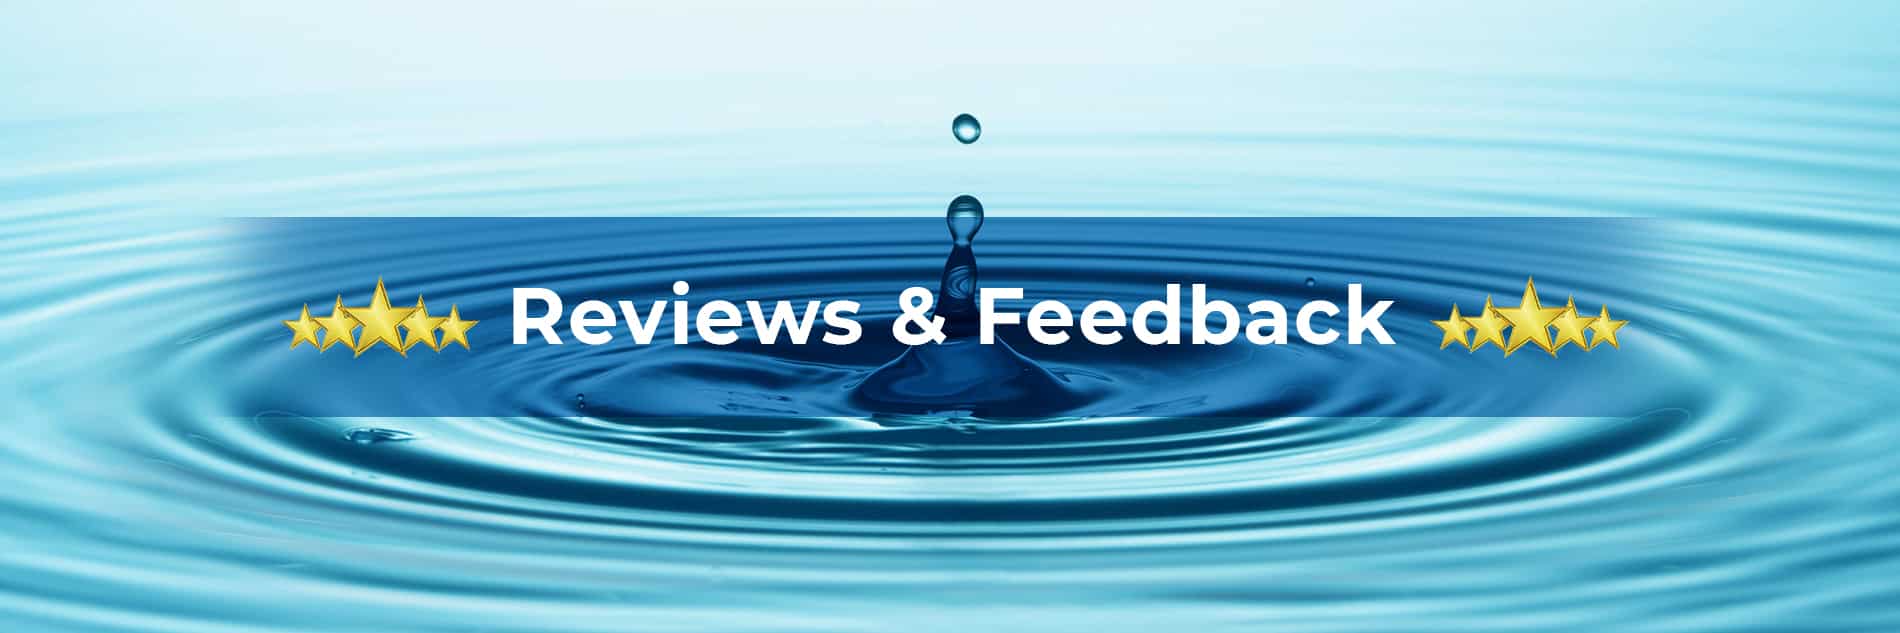 Reviews & Feedback | Water Drainage Contractors near me